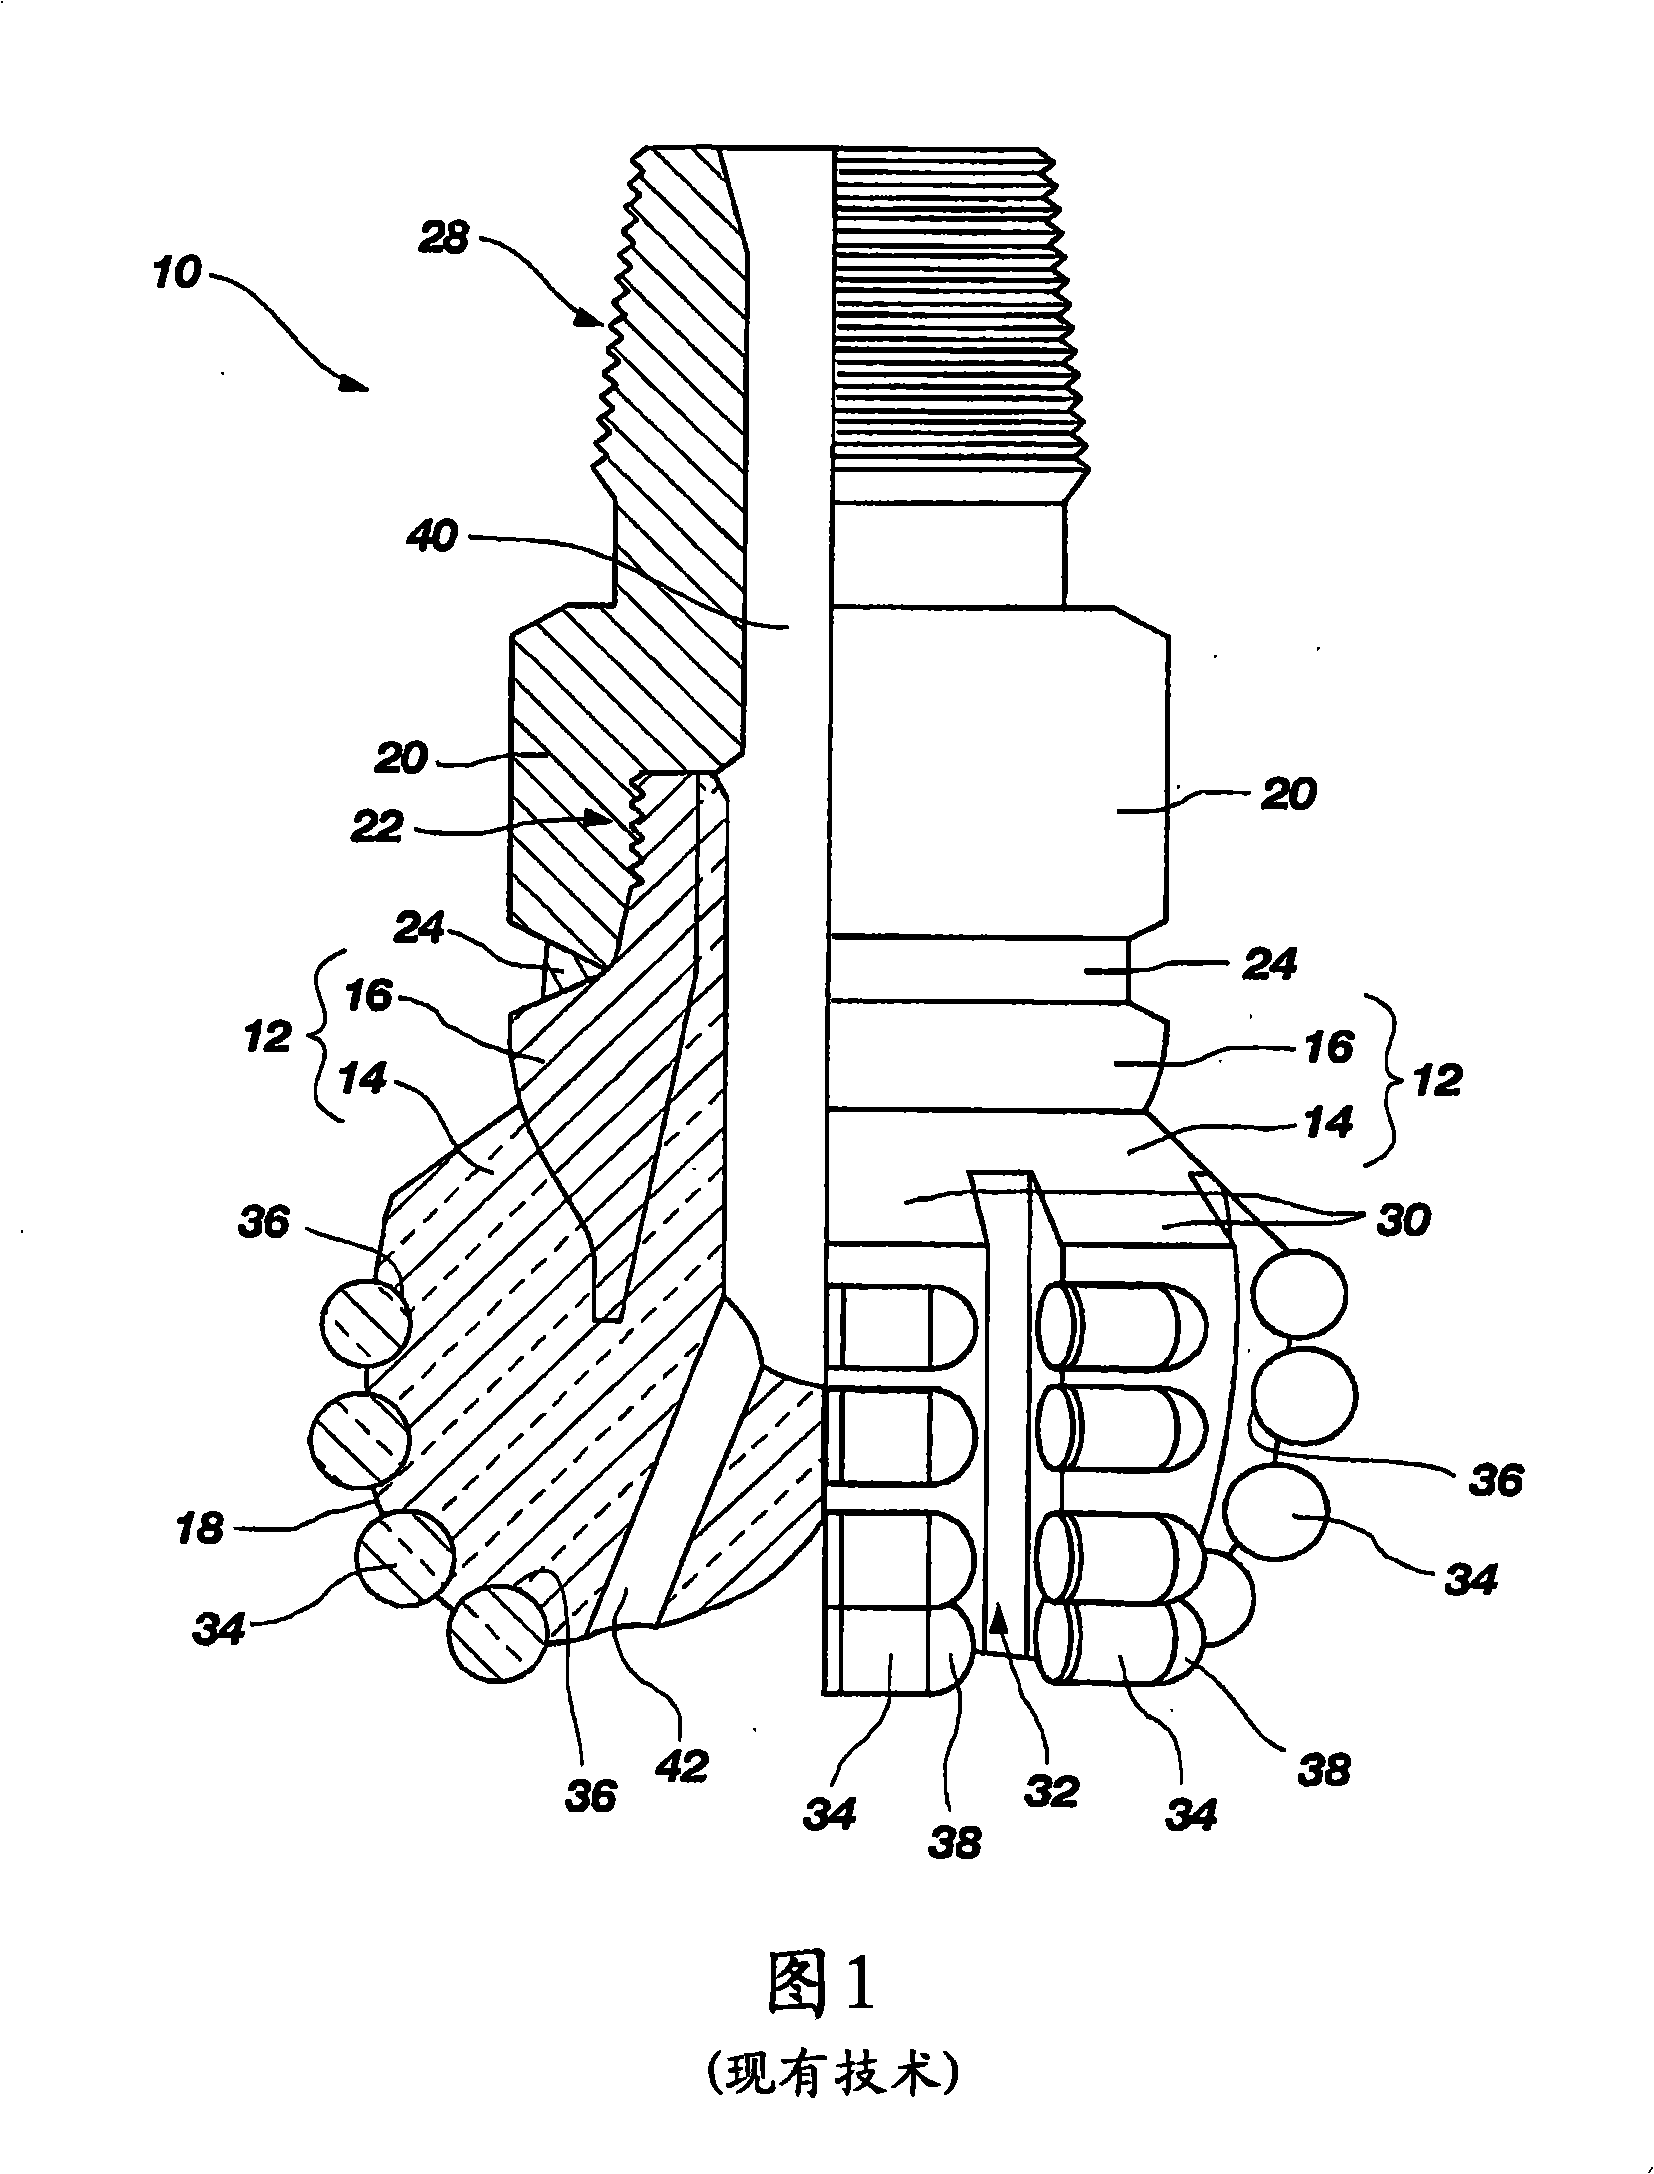 Earth-boring rotary drill bits and methods of manufacturing earth-boring rotary drill bits having particle-matrix composite bit bodies